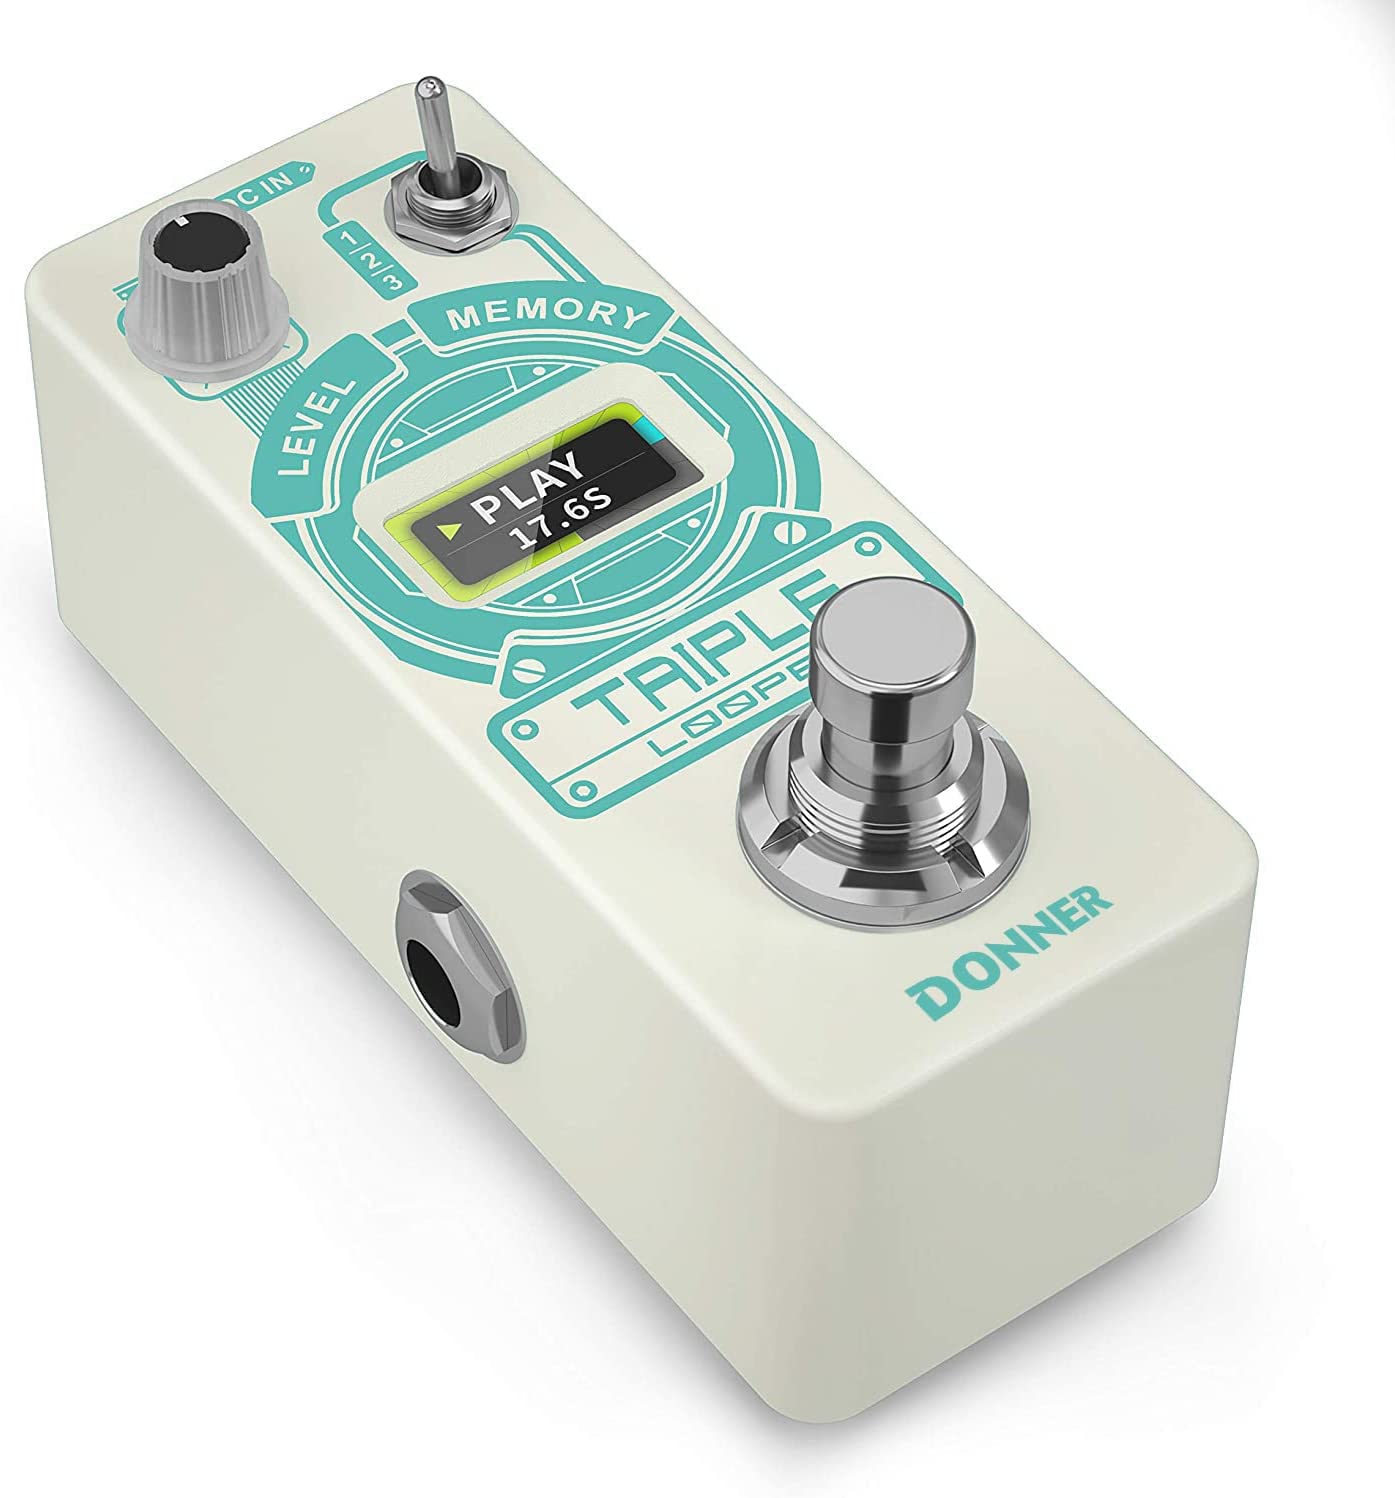 Donner Triple Looper Guitar Pedal on a white background